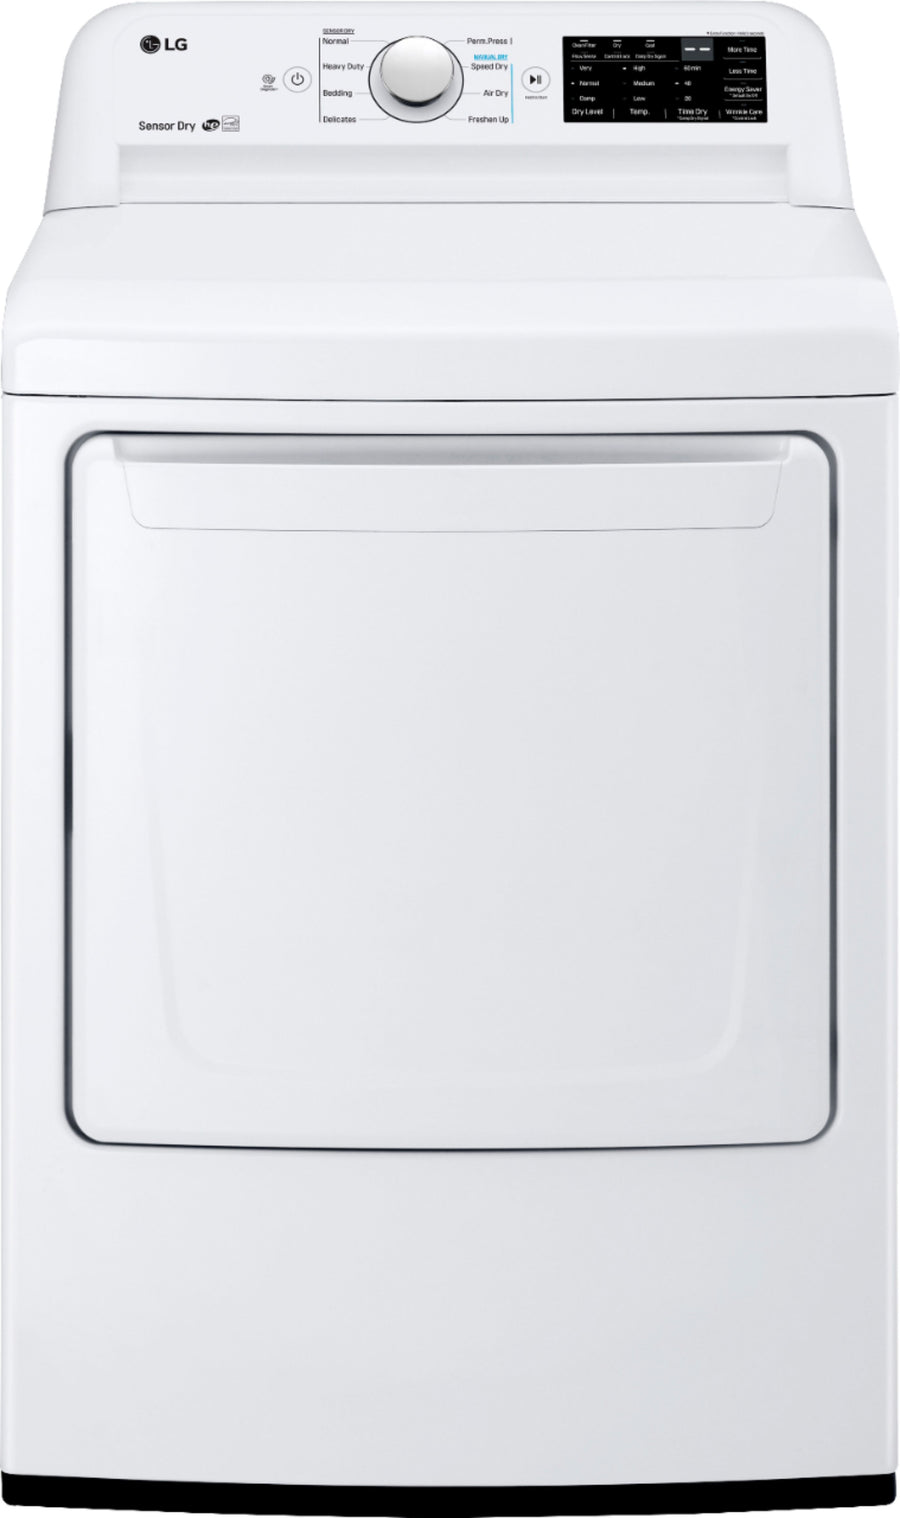 LG - 7.3 Cu. Ft. Gas Dryer with Sensor Dry - White_0